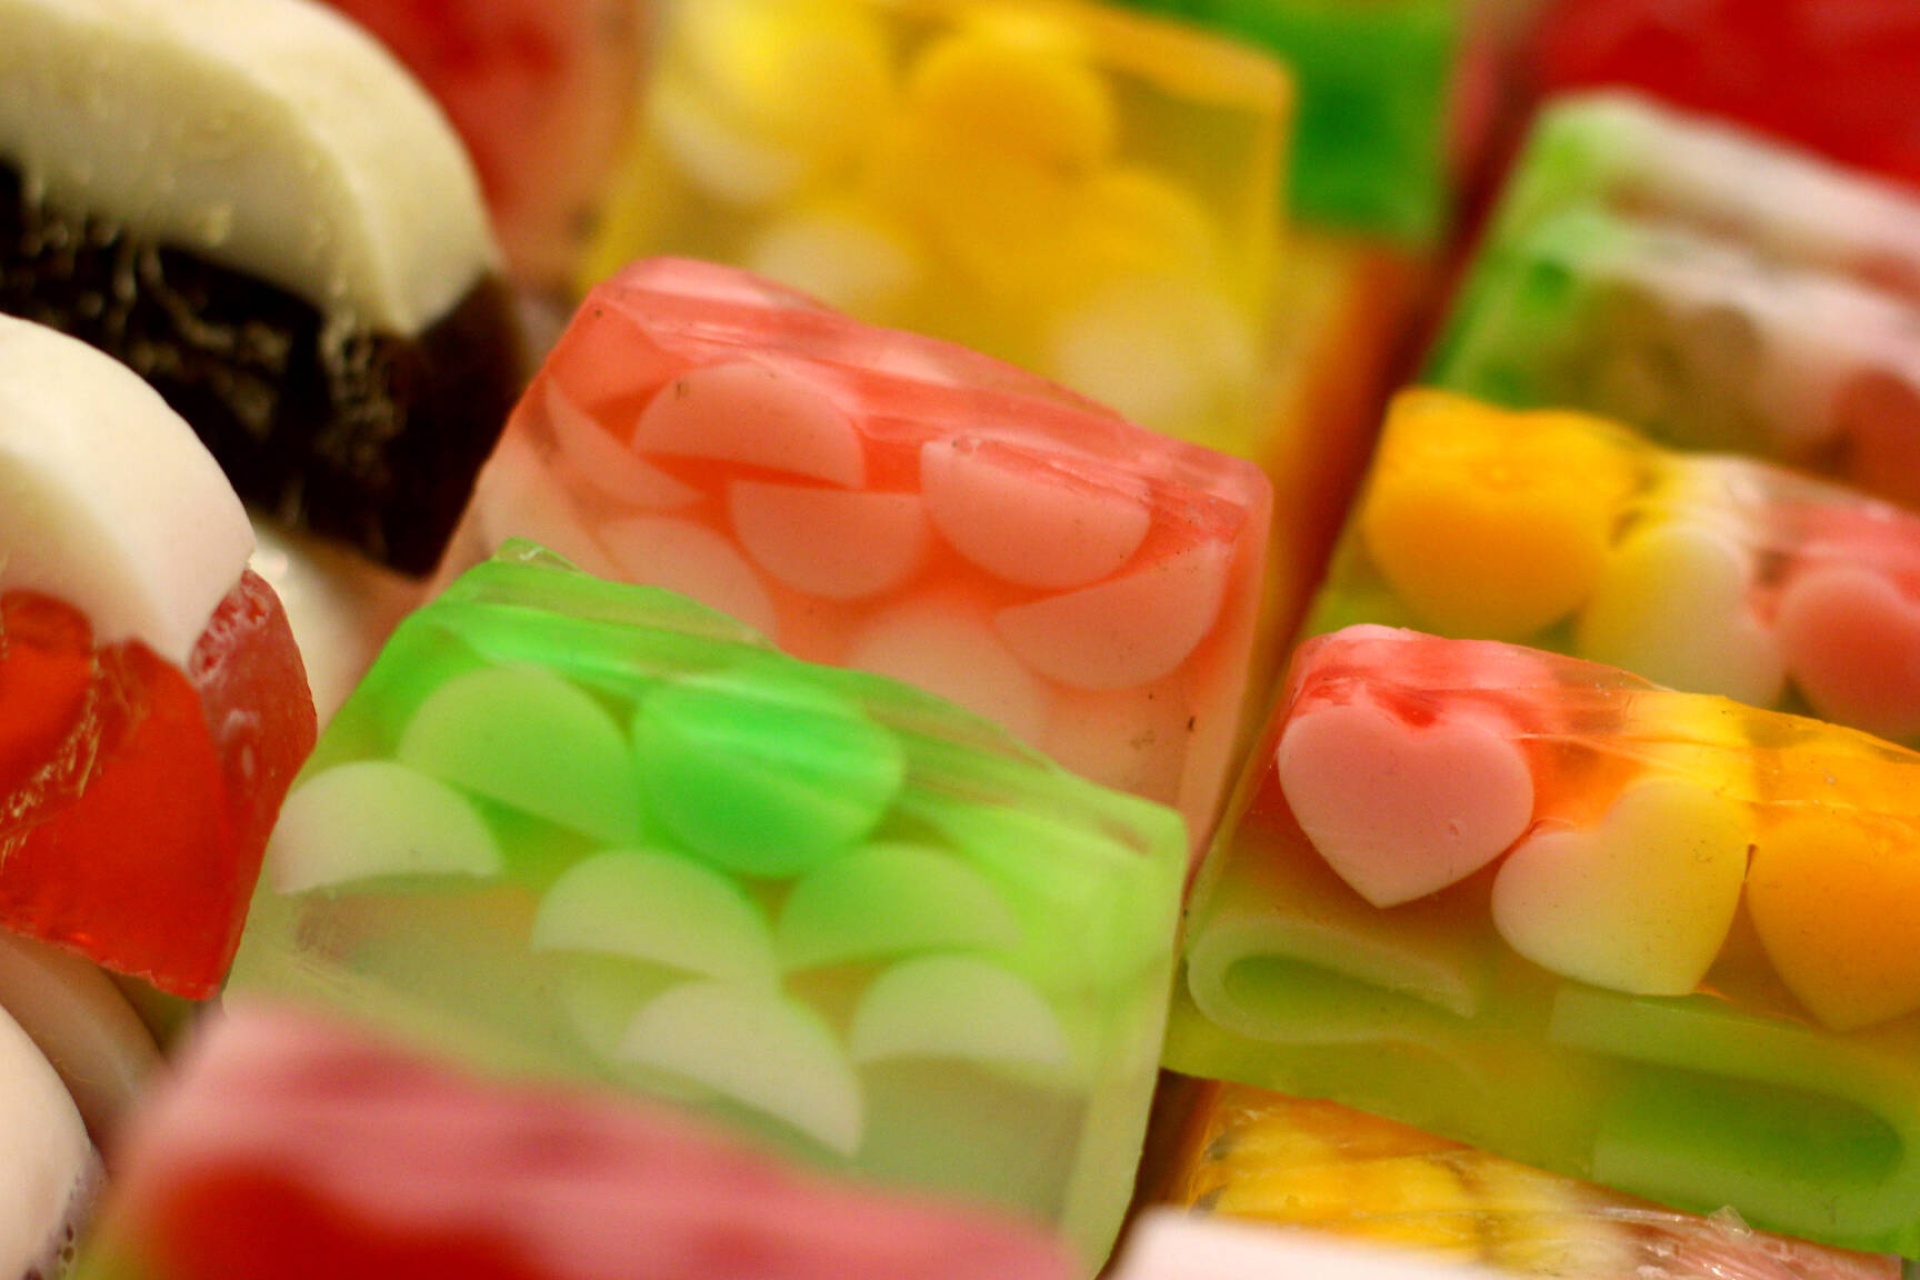 Fruit candy extravaganza, Sweet soap treats, Mouthwatering delight, Sugary indulgence, 1920x1280 HD Desktop